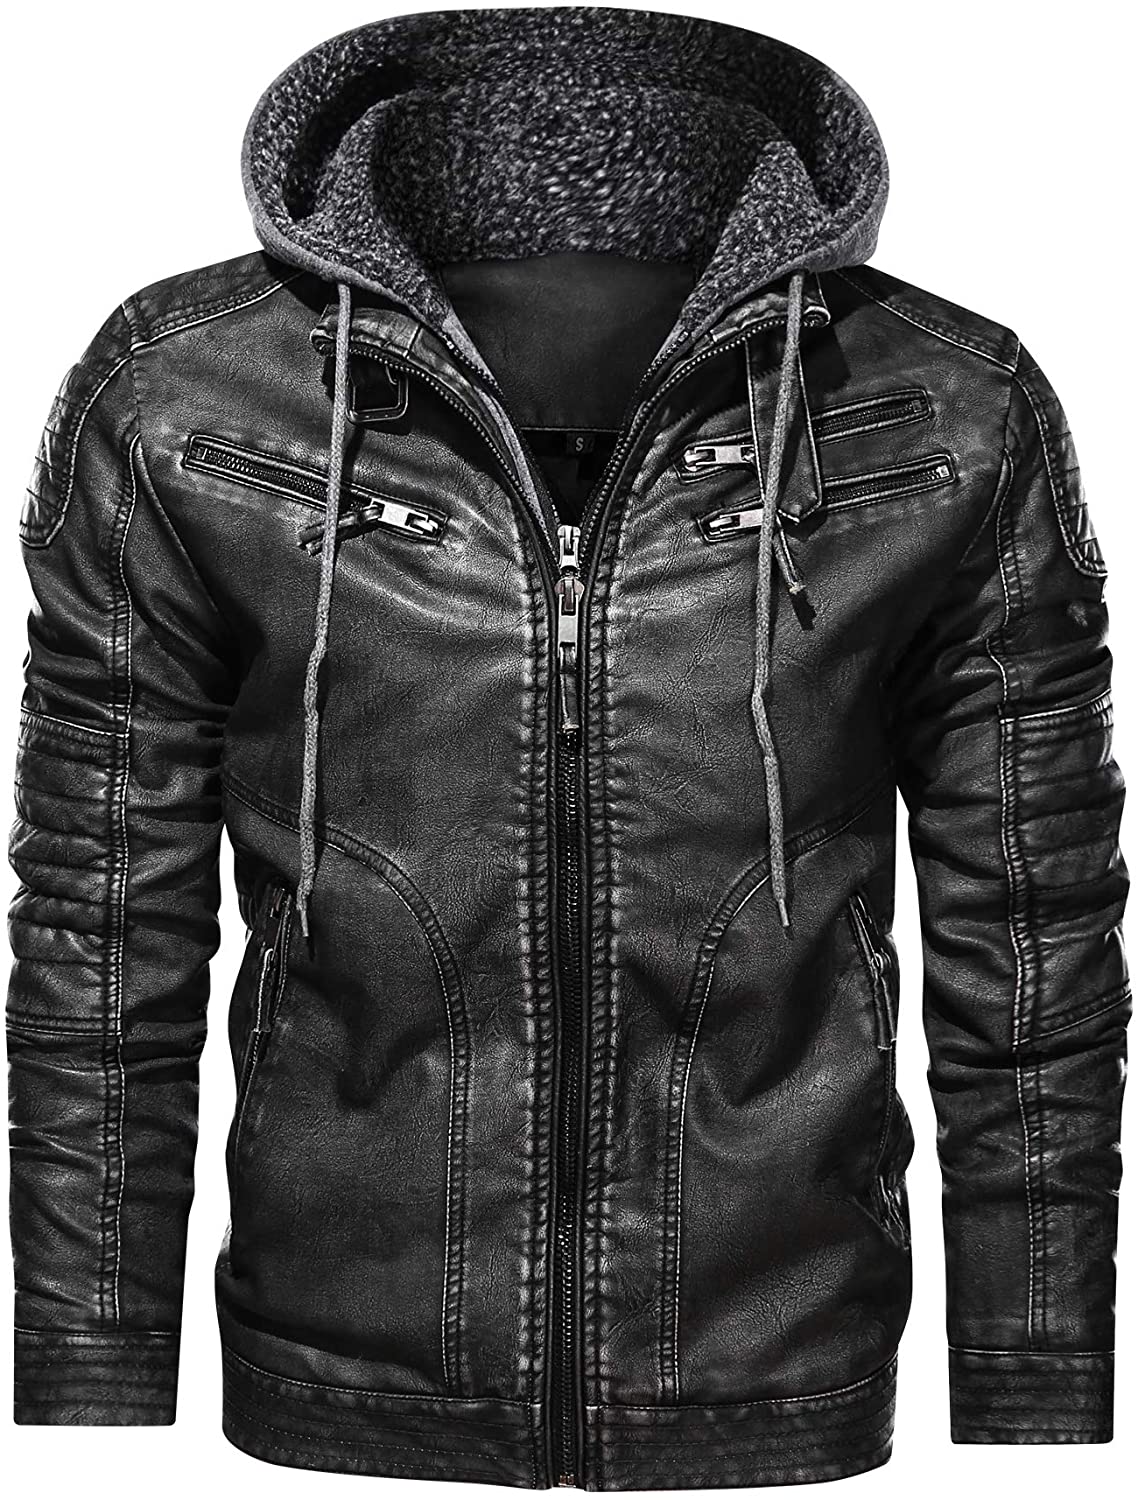 JYG Men's Faux Leather Motorcycle Jacket with Removable Hood | eBay